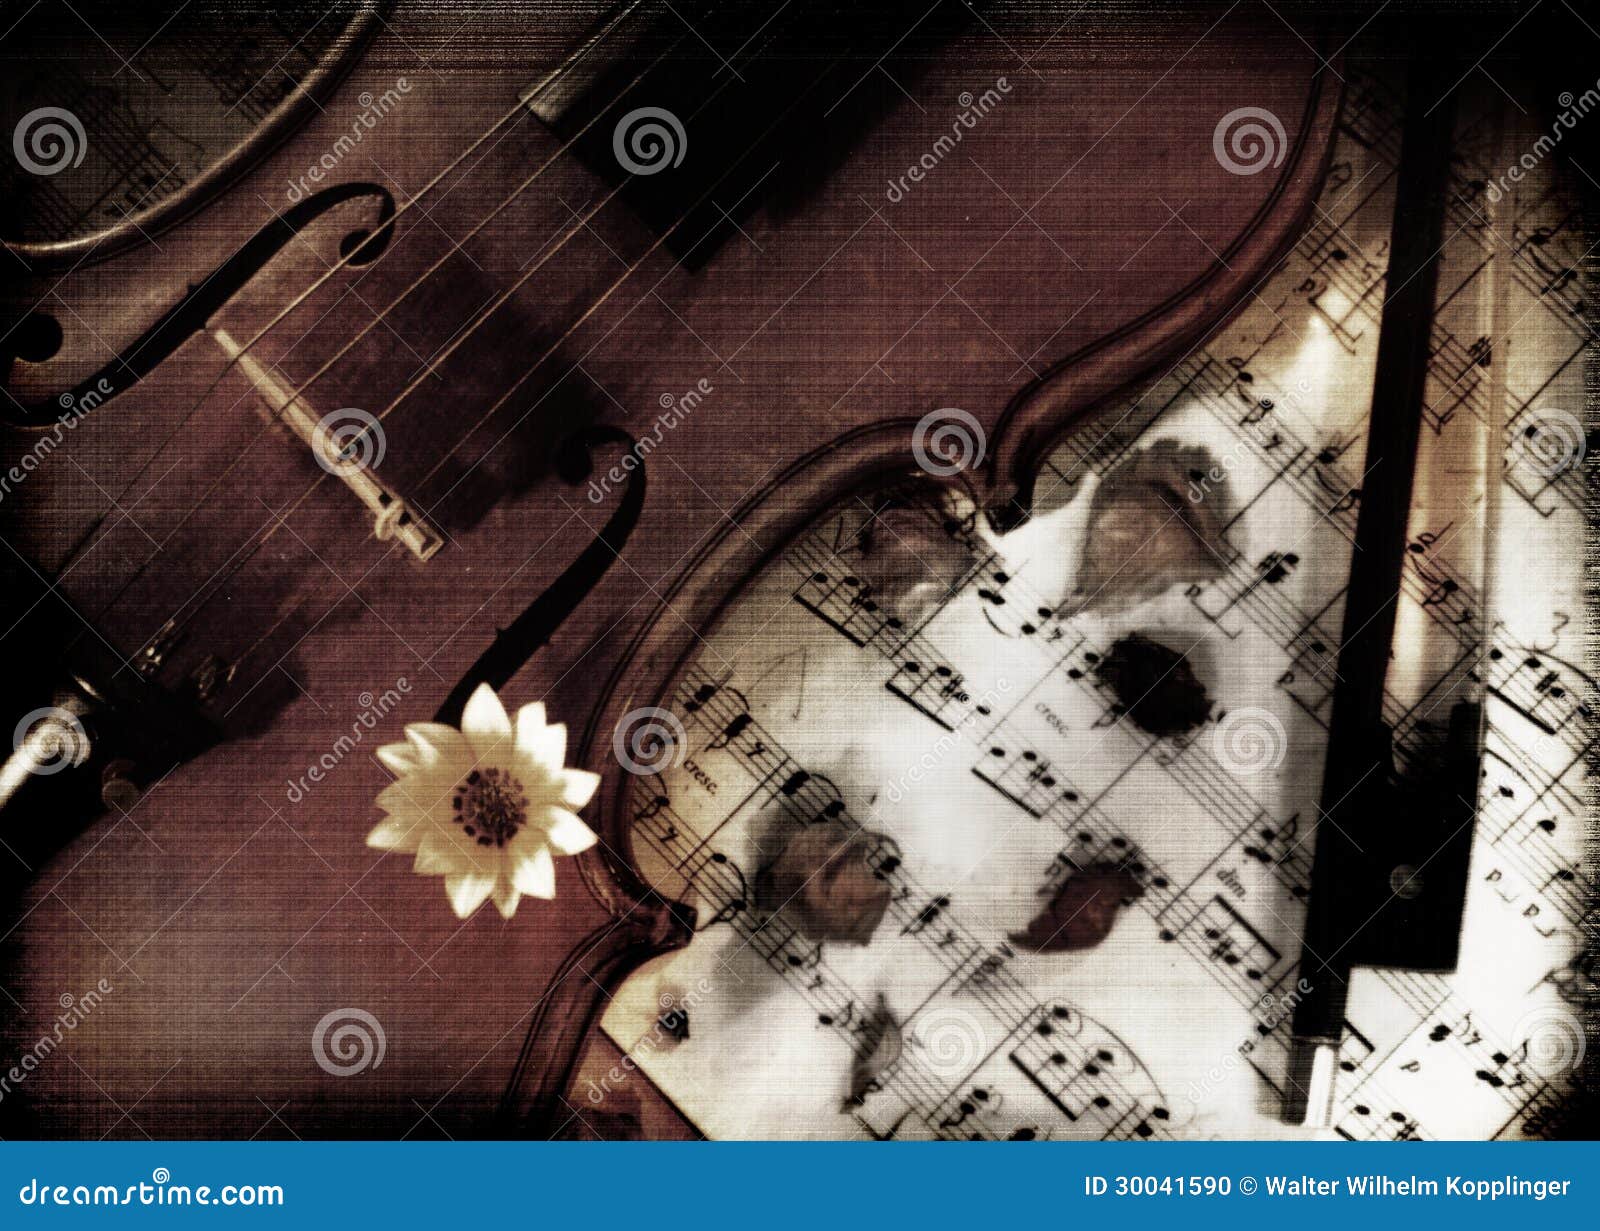 violin with music on grunge